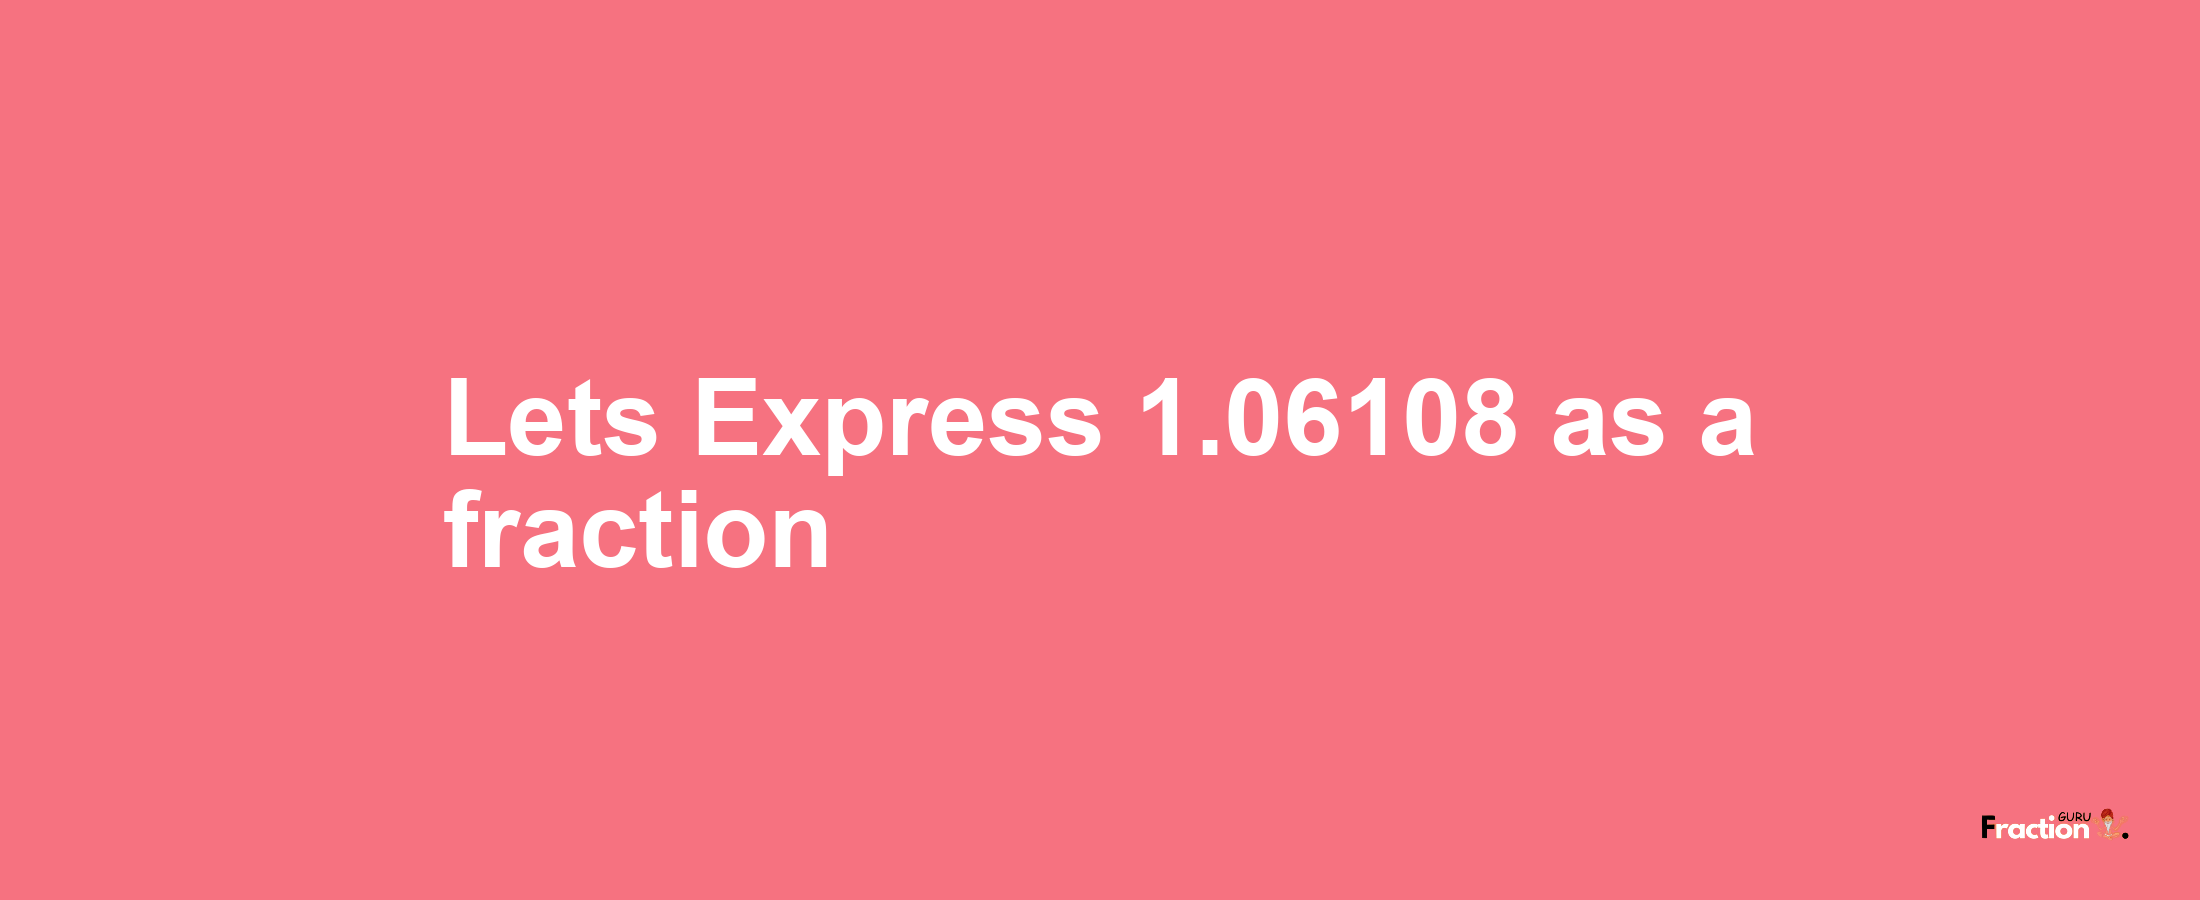 Lets Express 1.06108 as afraction